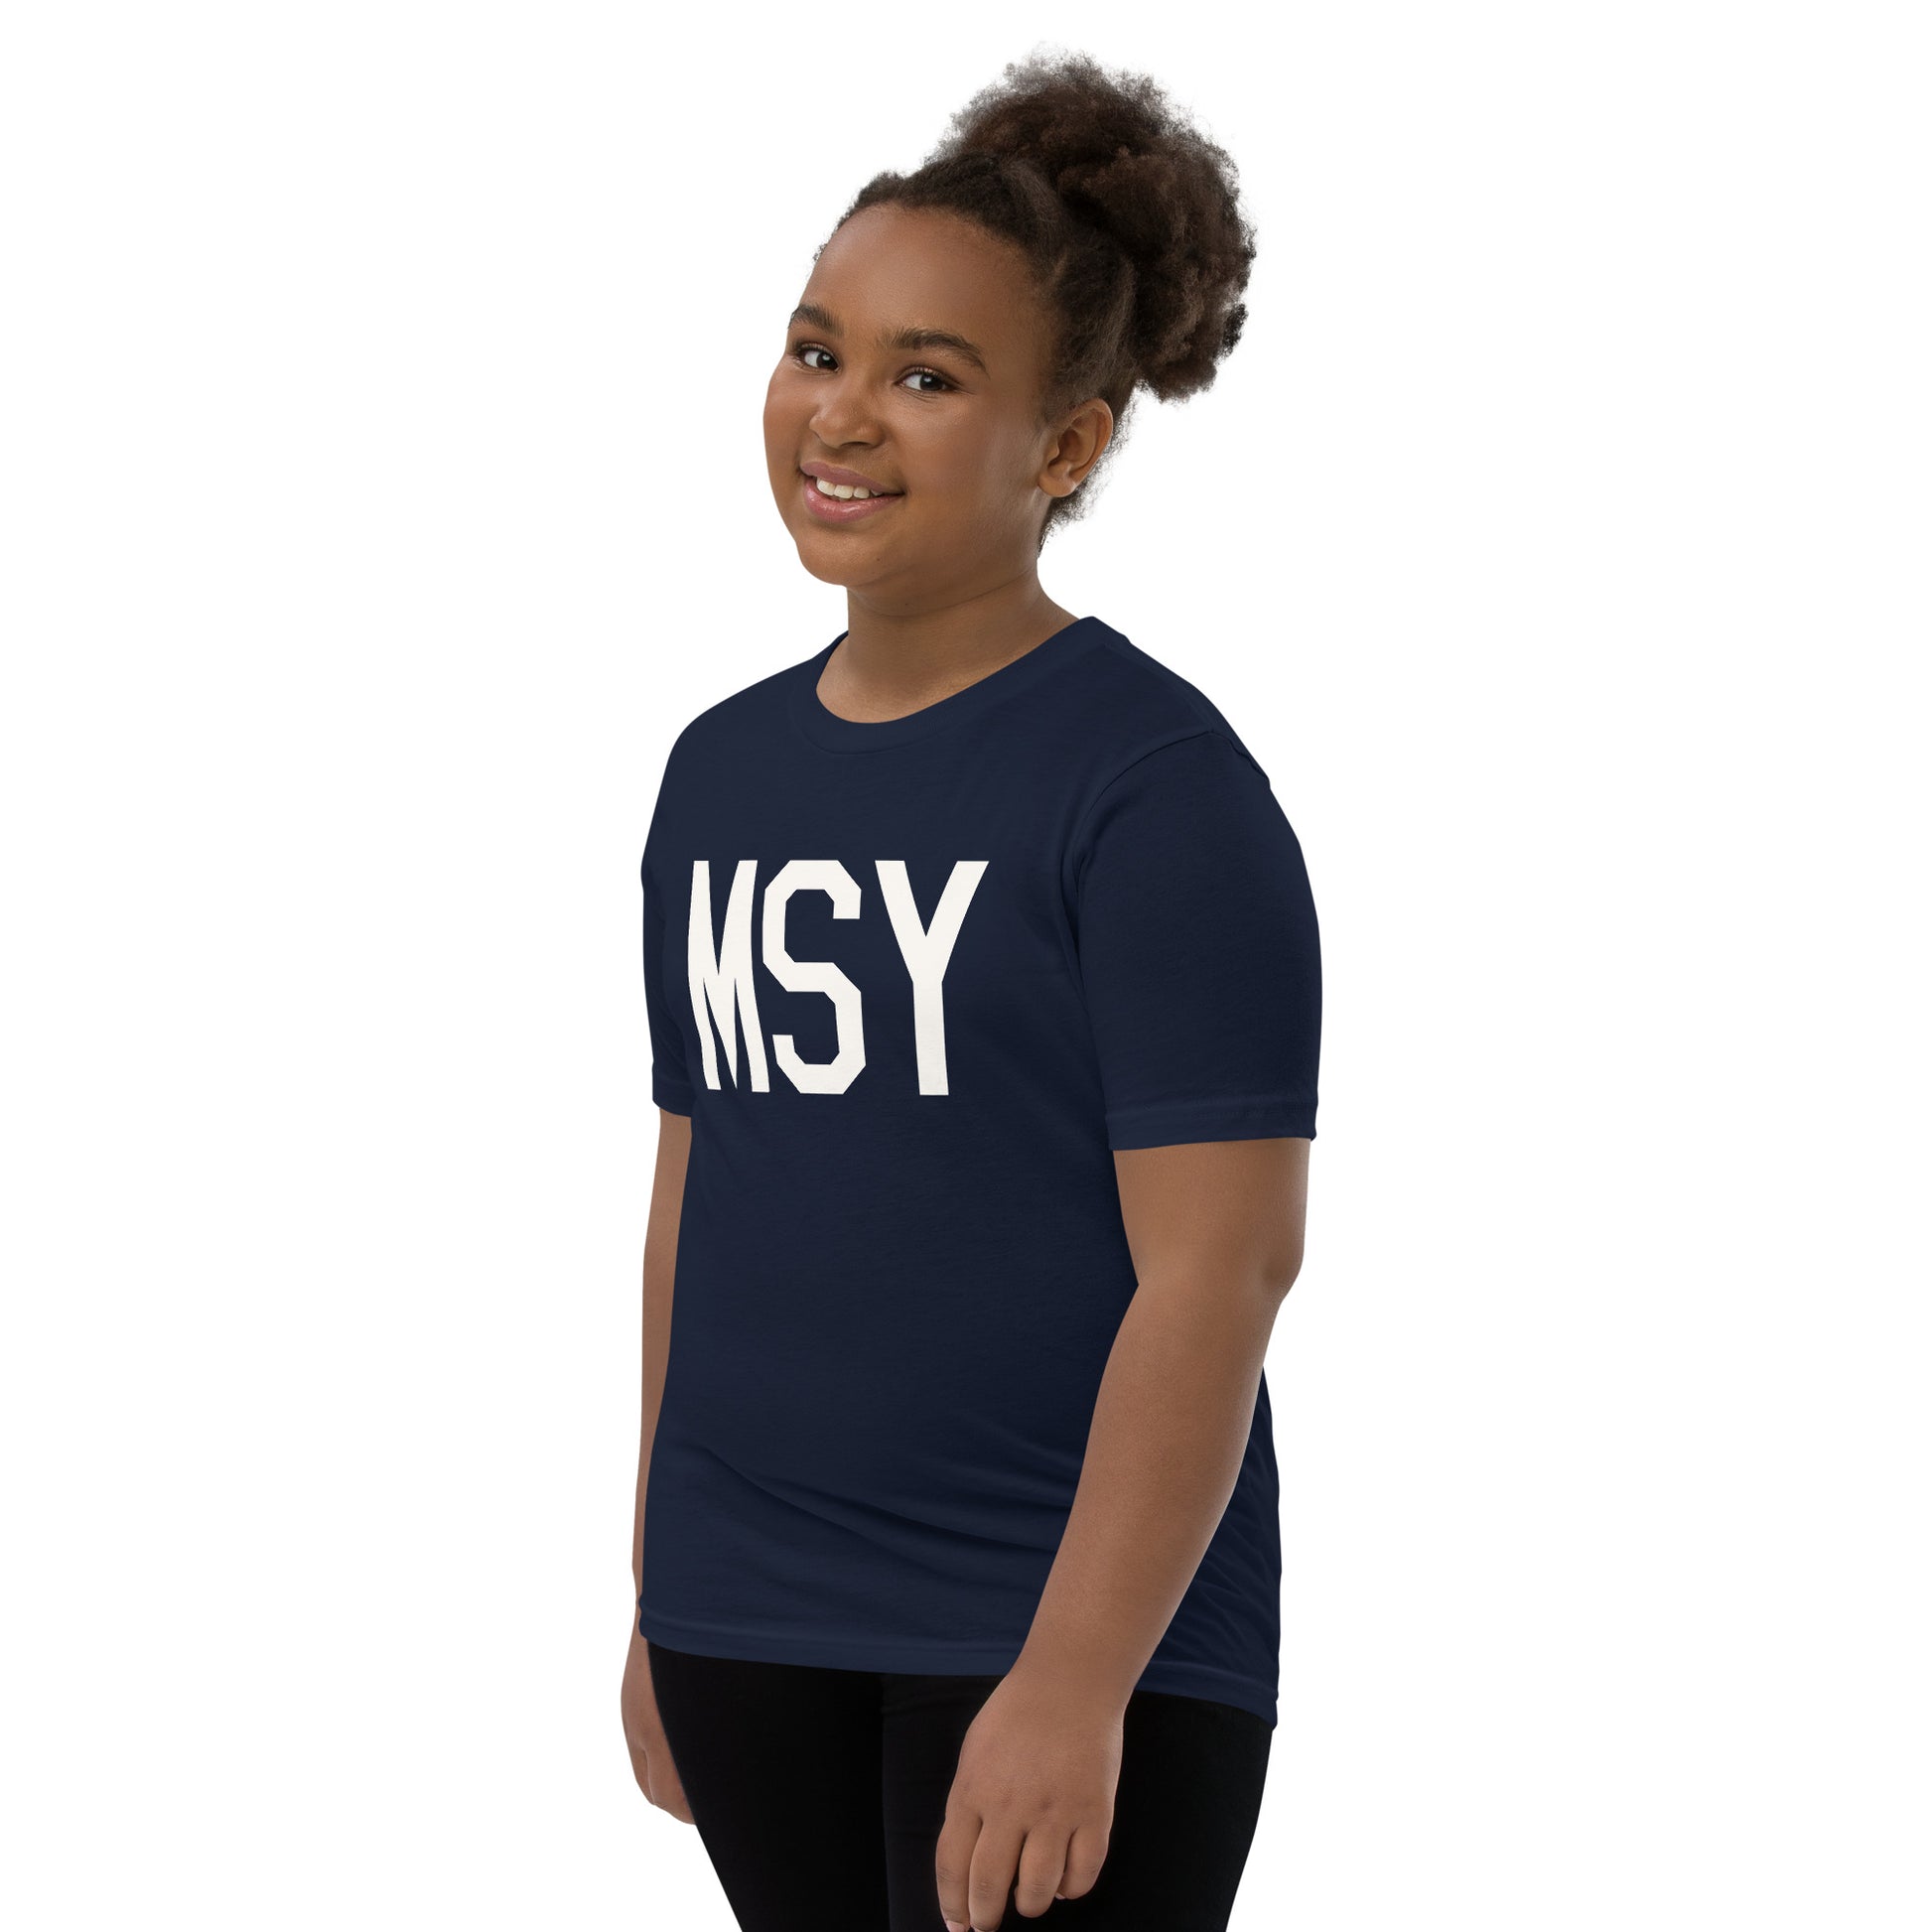 Kid's T-Shirt - White Graphic • MSY New Orleans • YHM Designs - Image 02